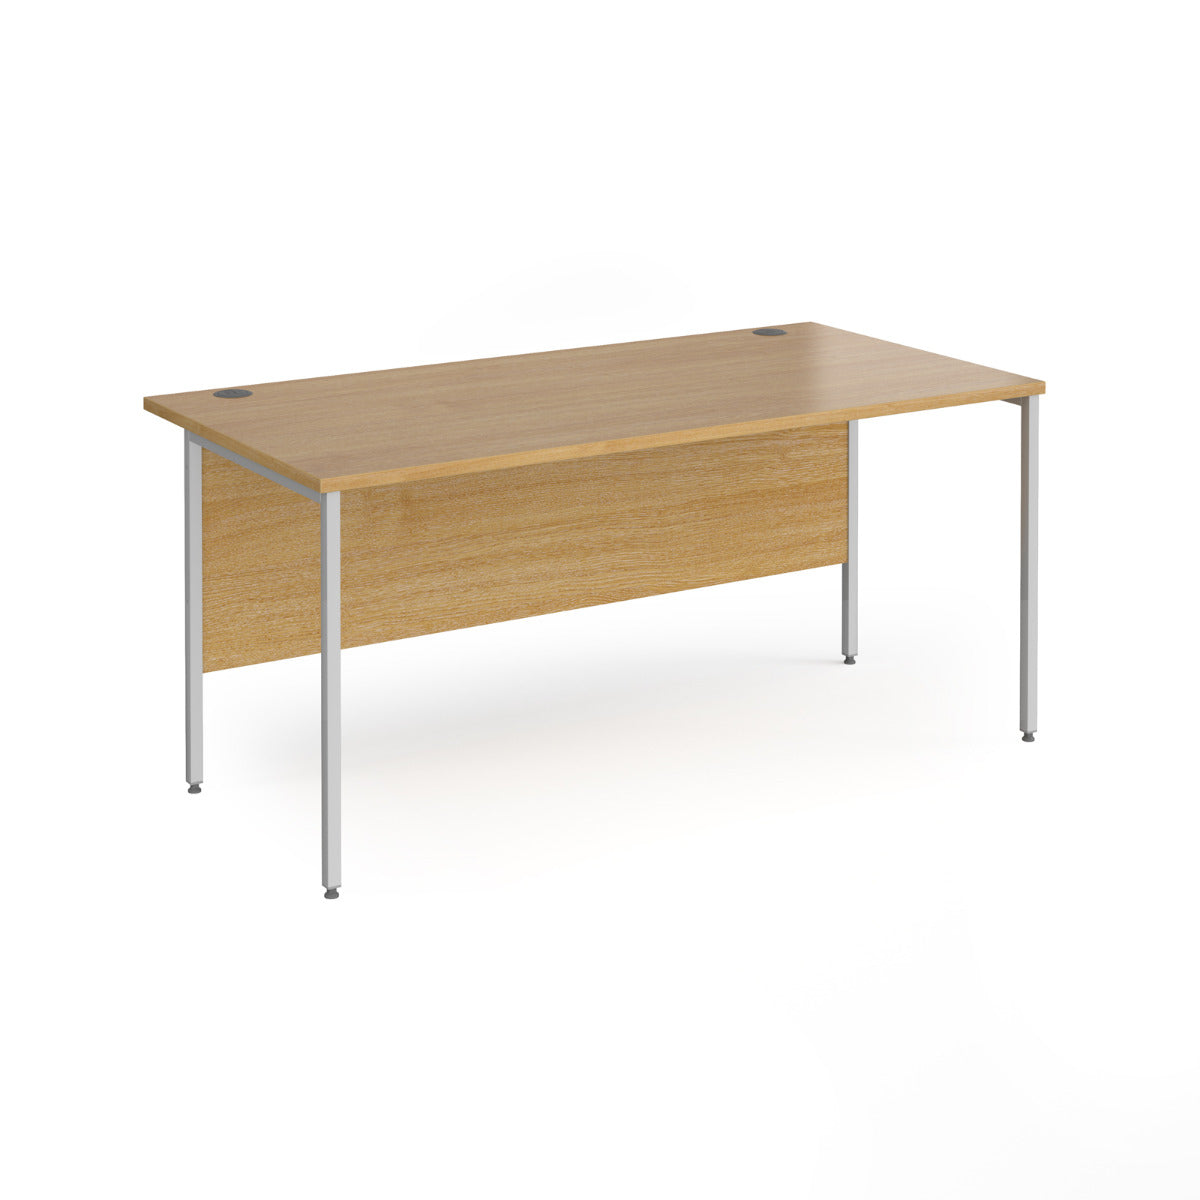 Contract H Frame Straight Office Desk